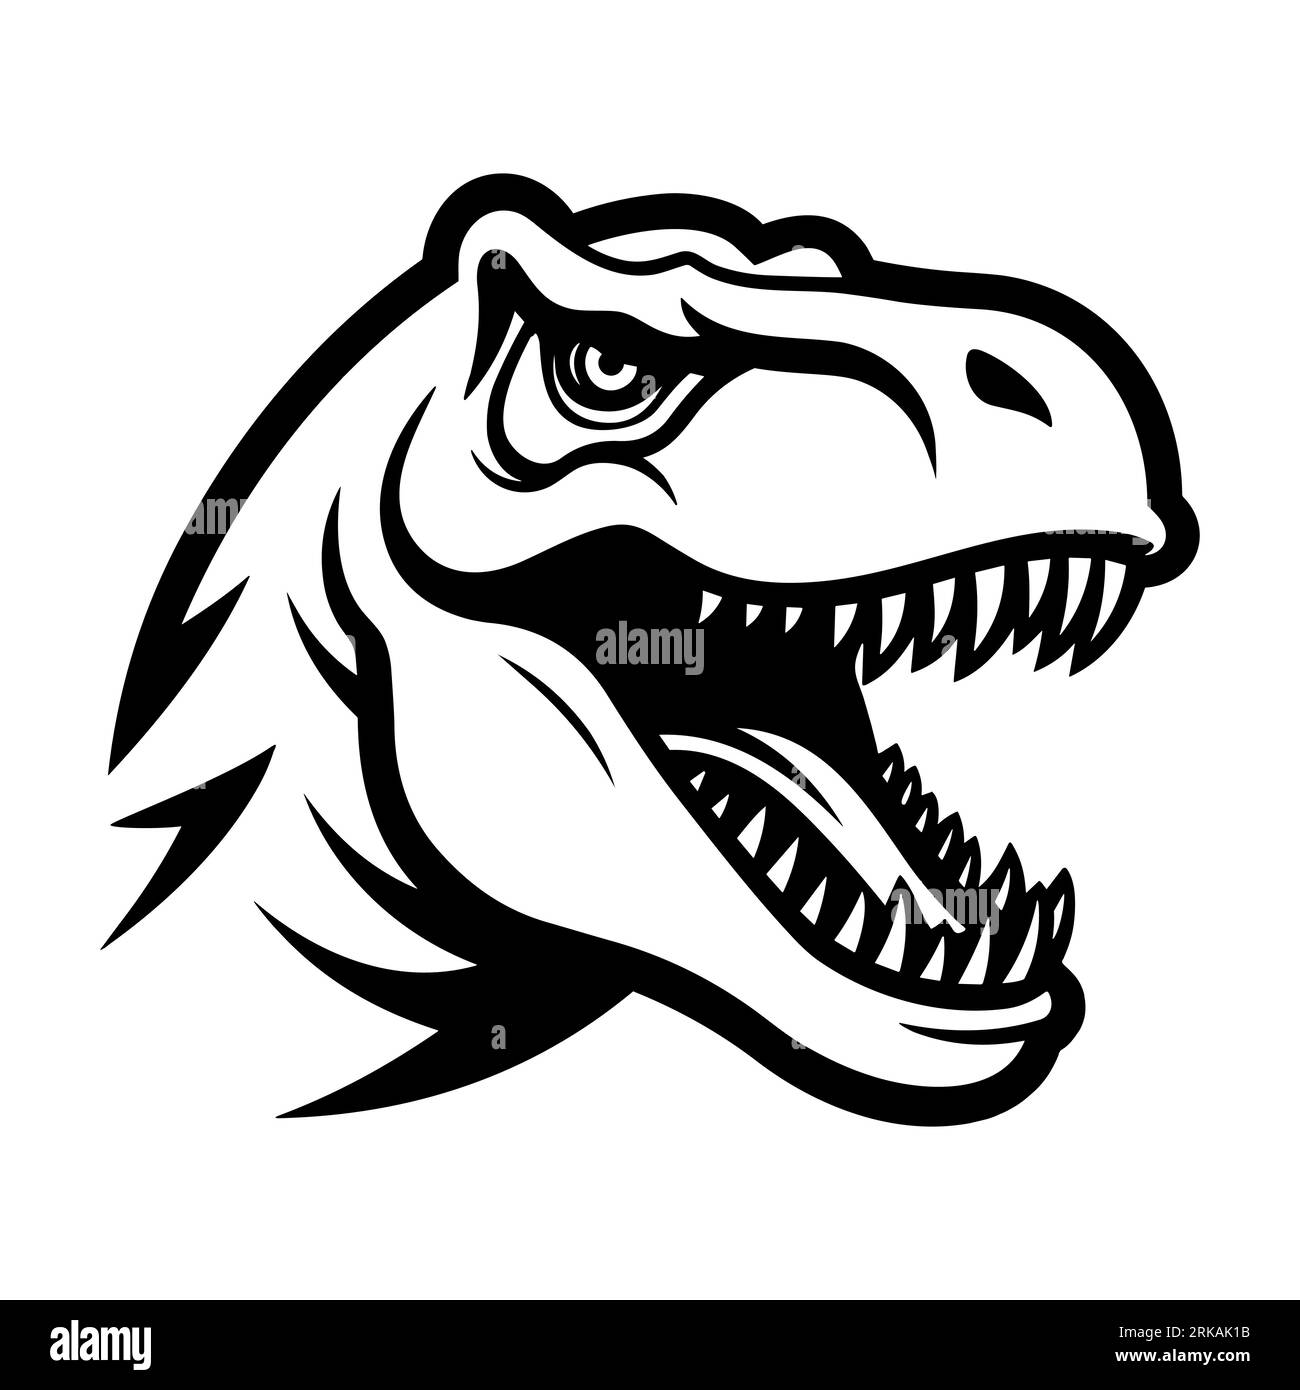 Vector Black and White Tyrannosaurus Rex Head Icon, Cutout Silhouette Illustration, Design Template for T-Shirt Printing, Textile, Stickers, Art etc. Stock Vector